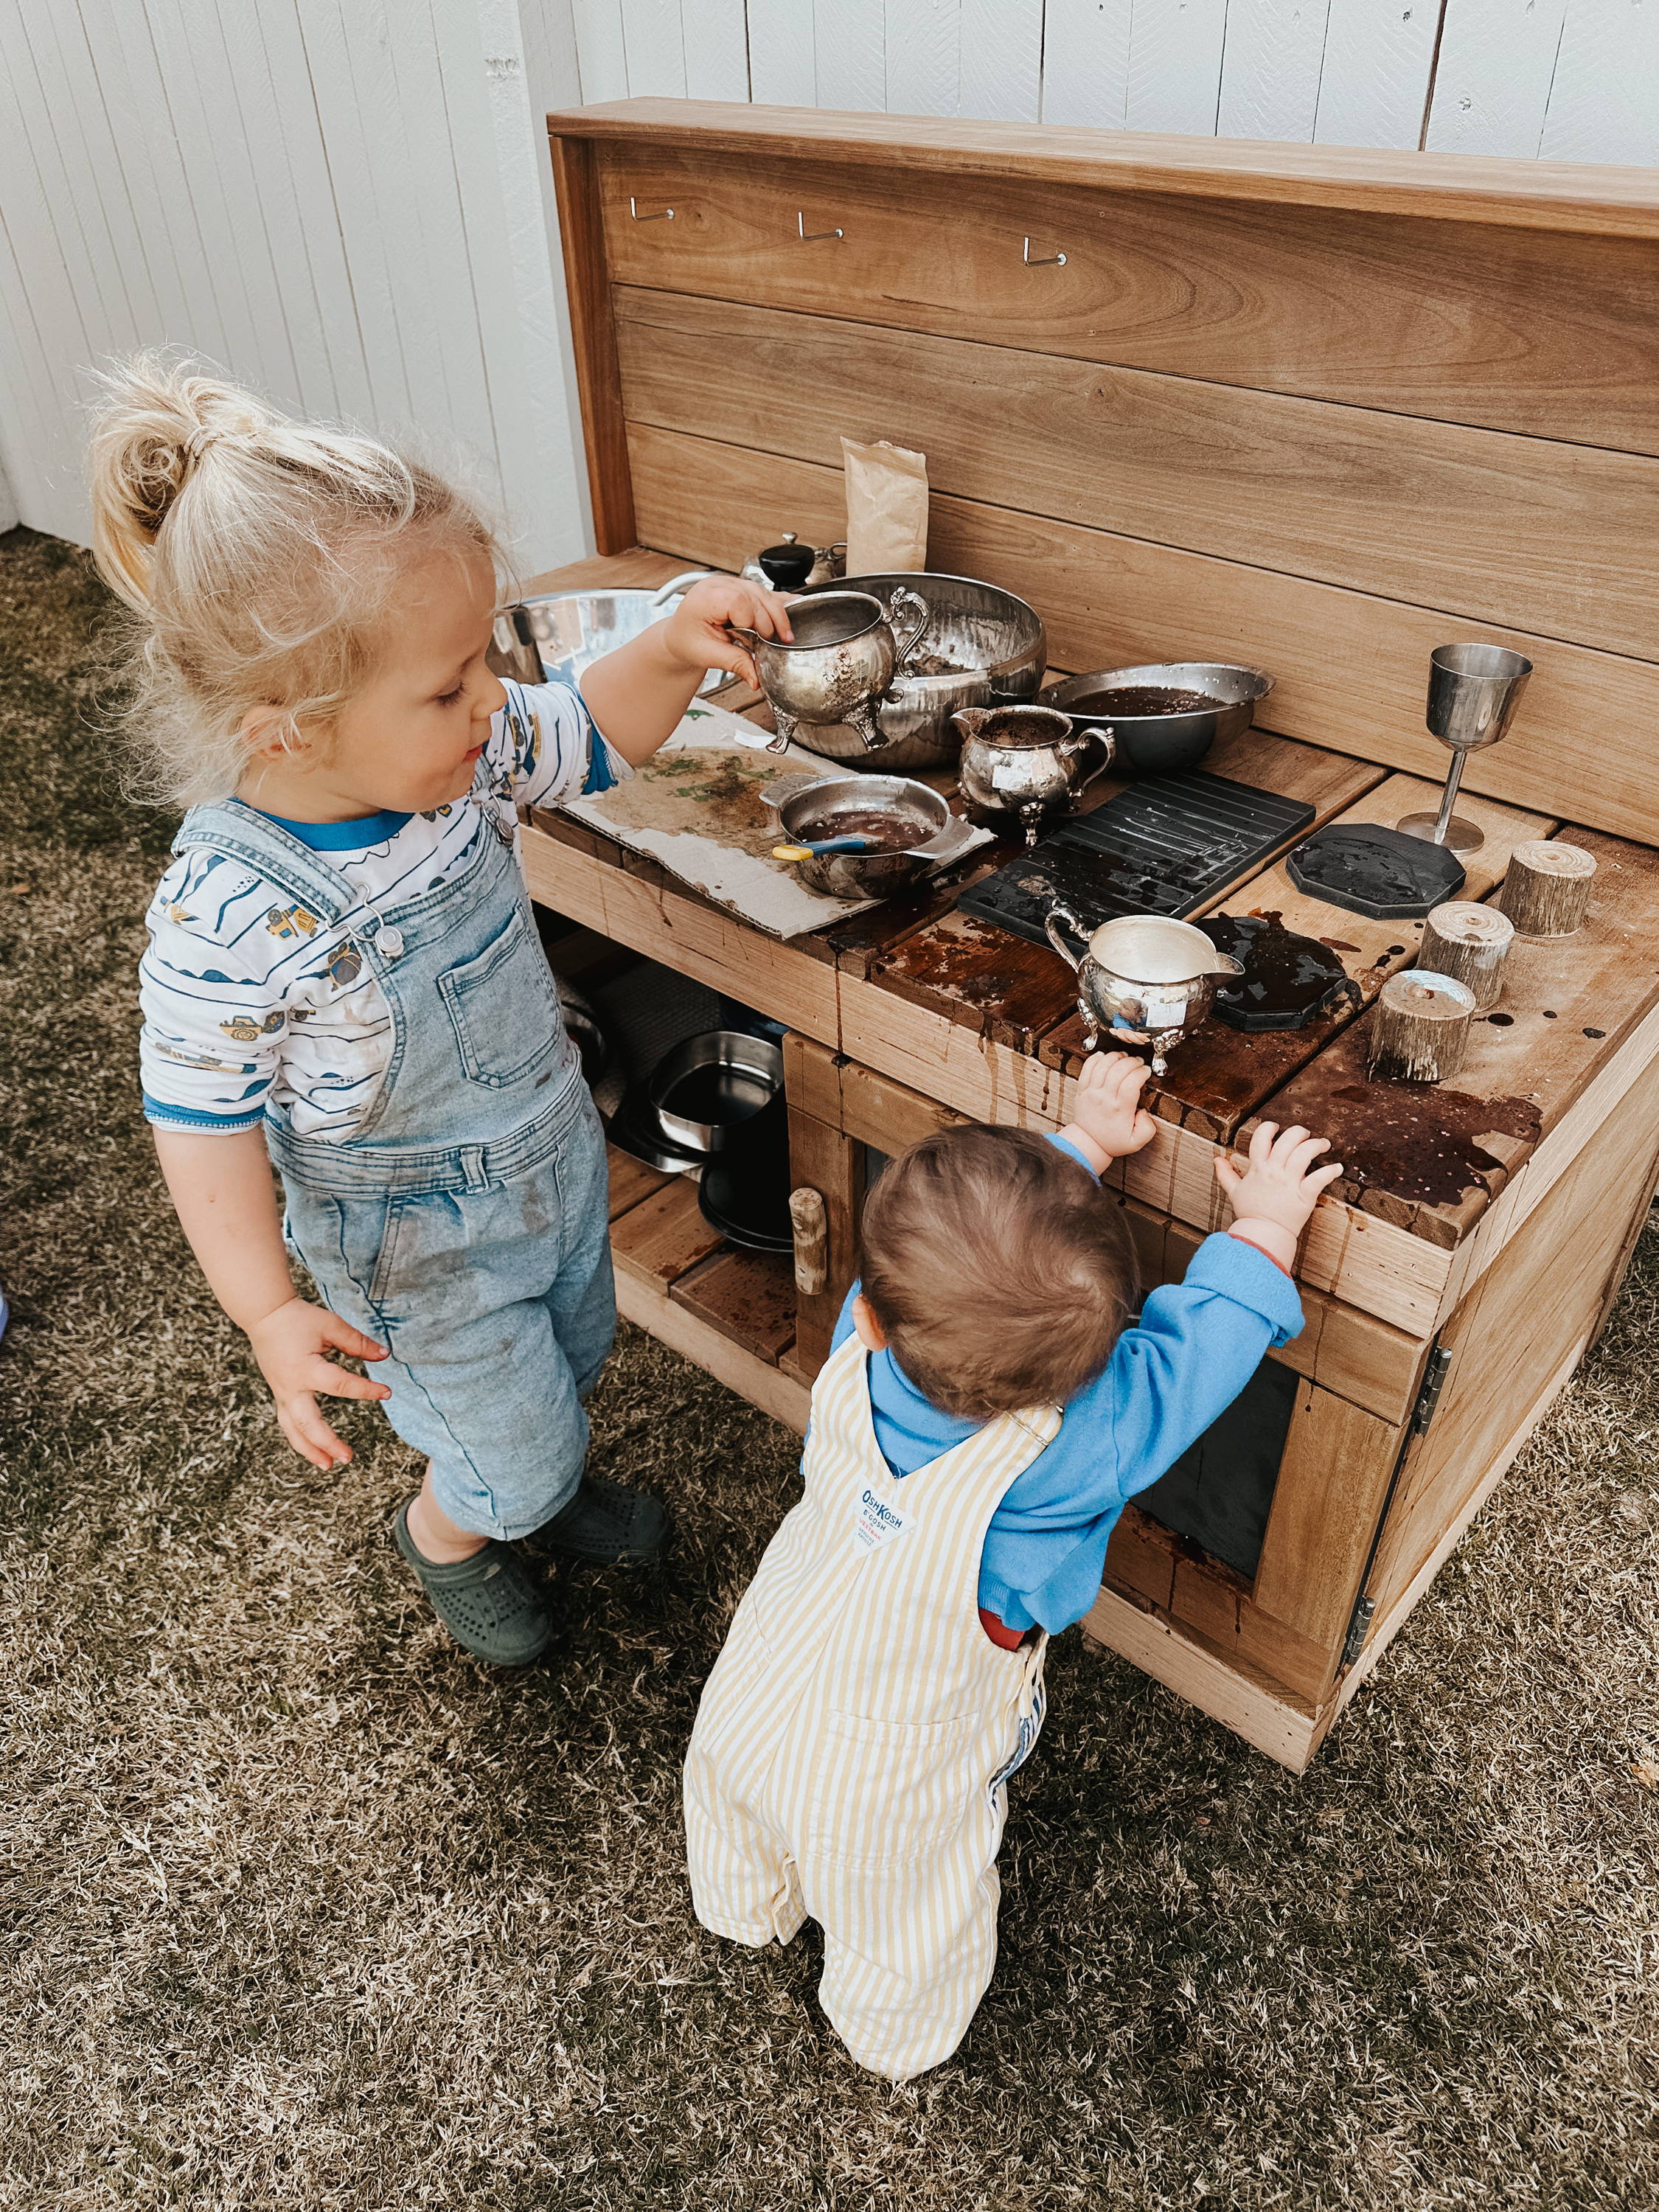 Kids playing with potions on a mud kitchen